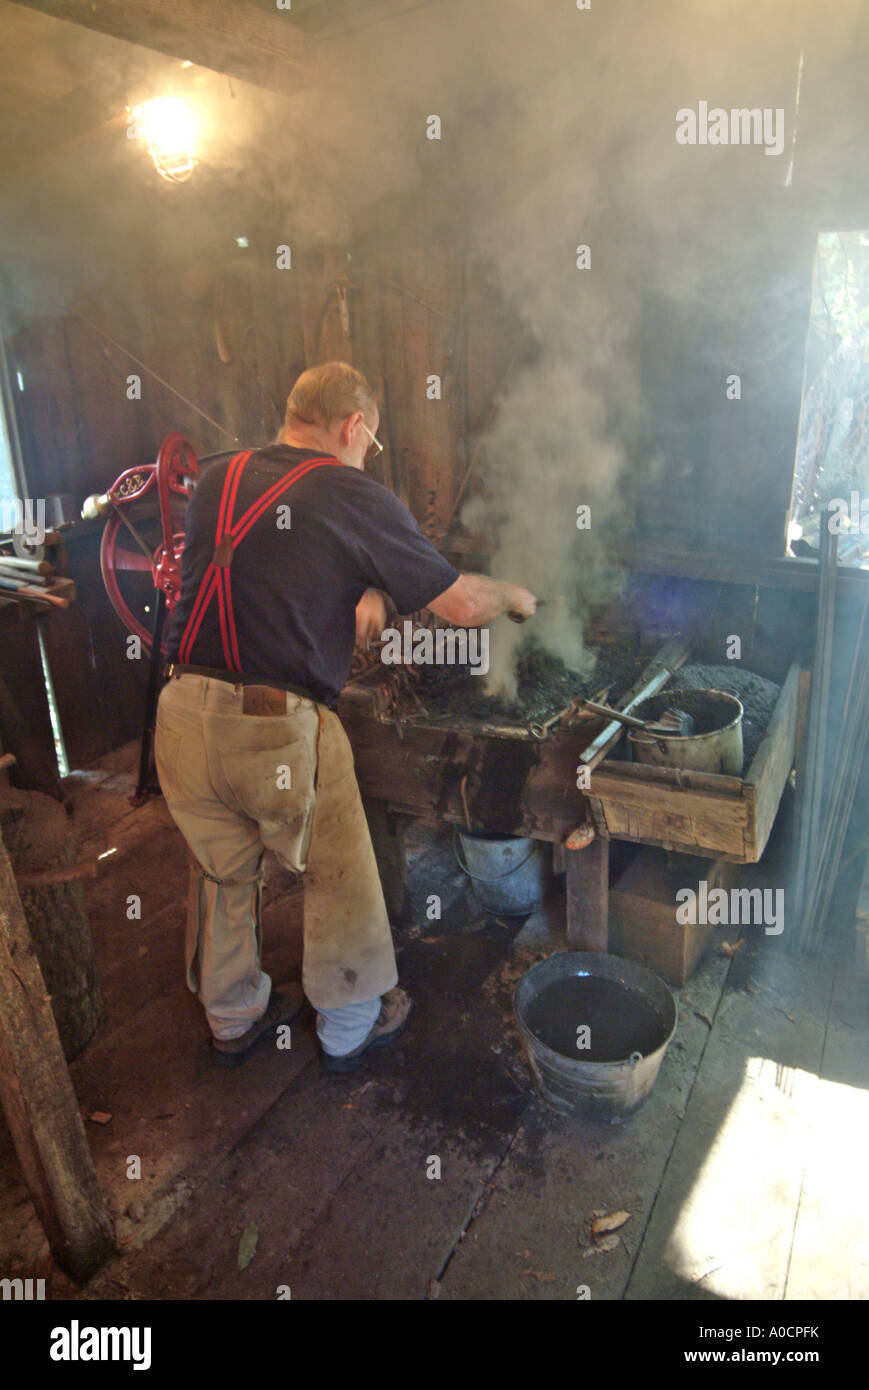 The shack fills full of smoke as a blacksmith prepares the coal fed fire before working on a metal tool at a saw mill in Occiden Stock Photo